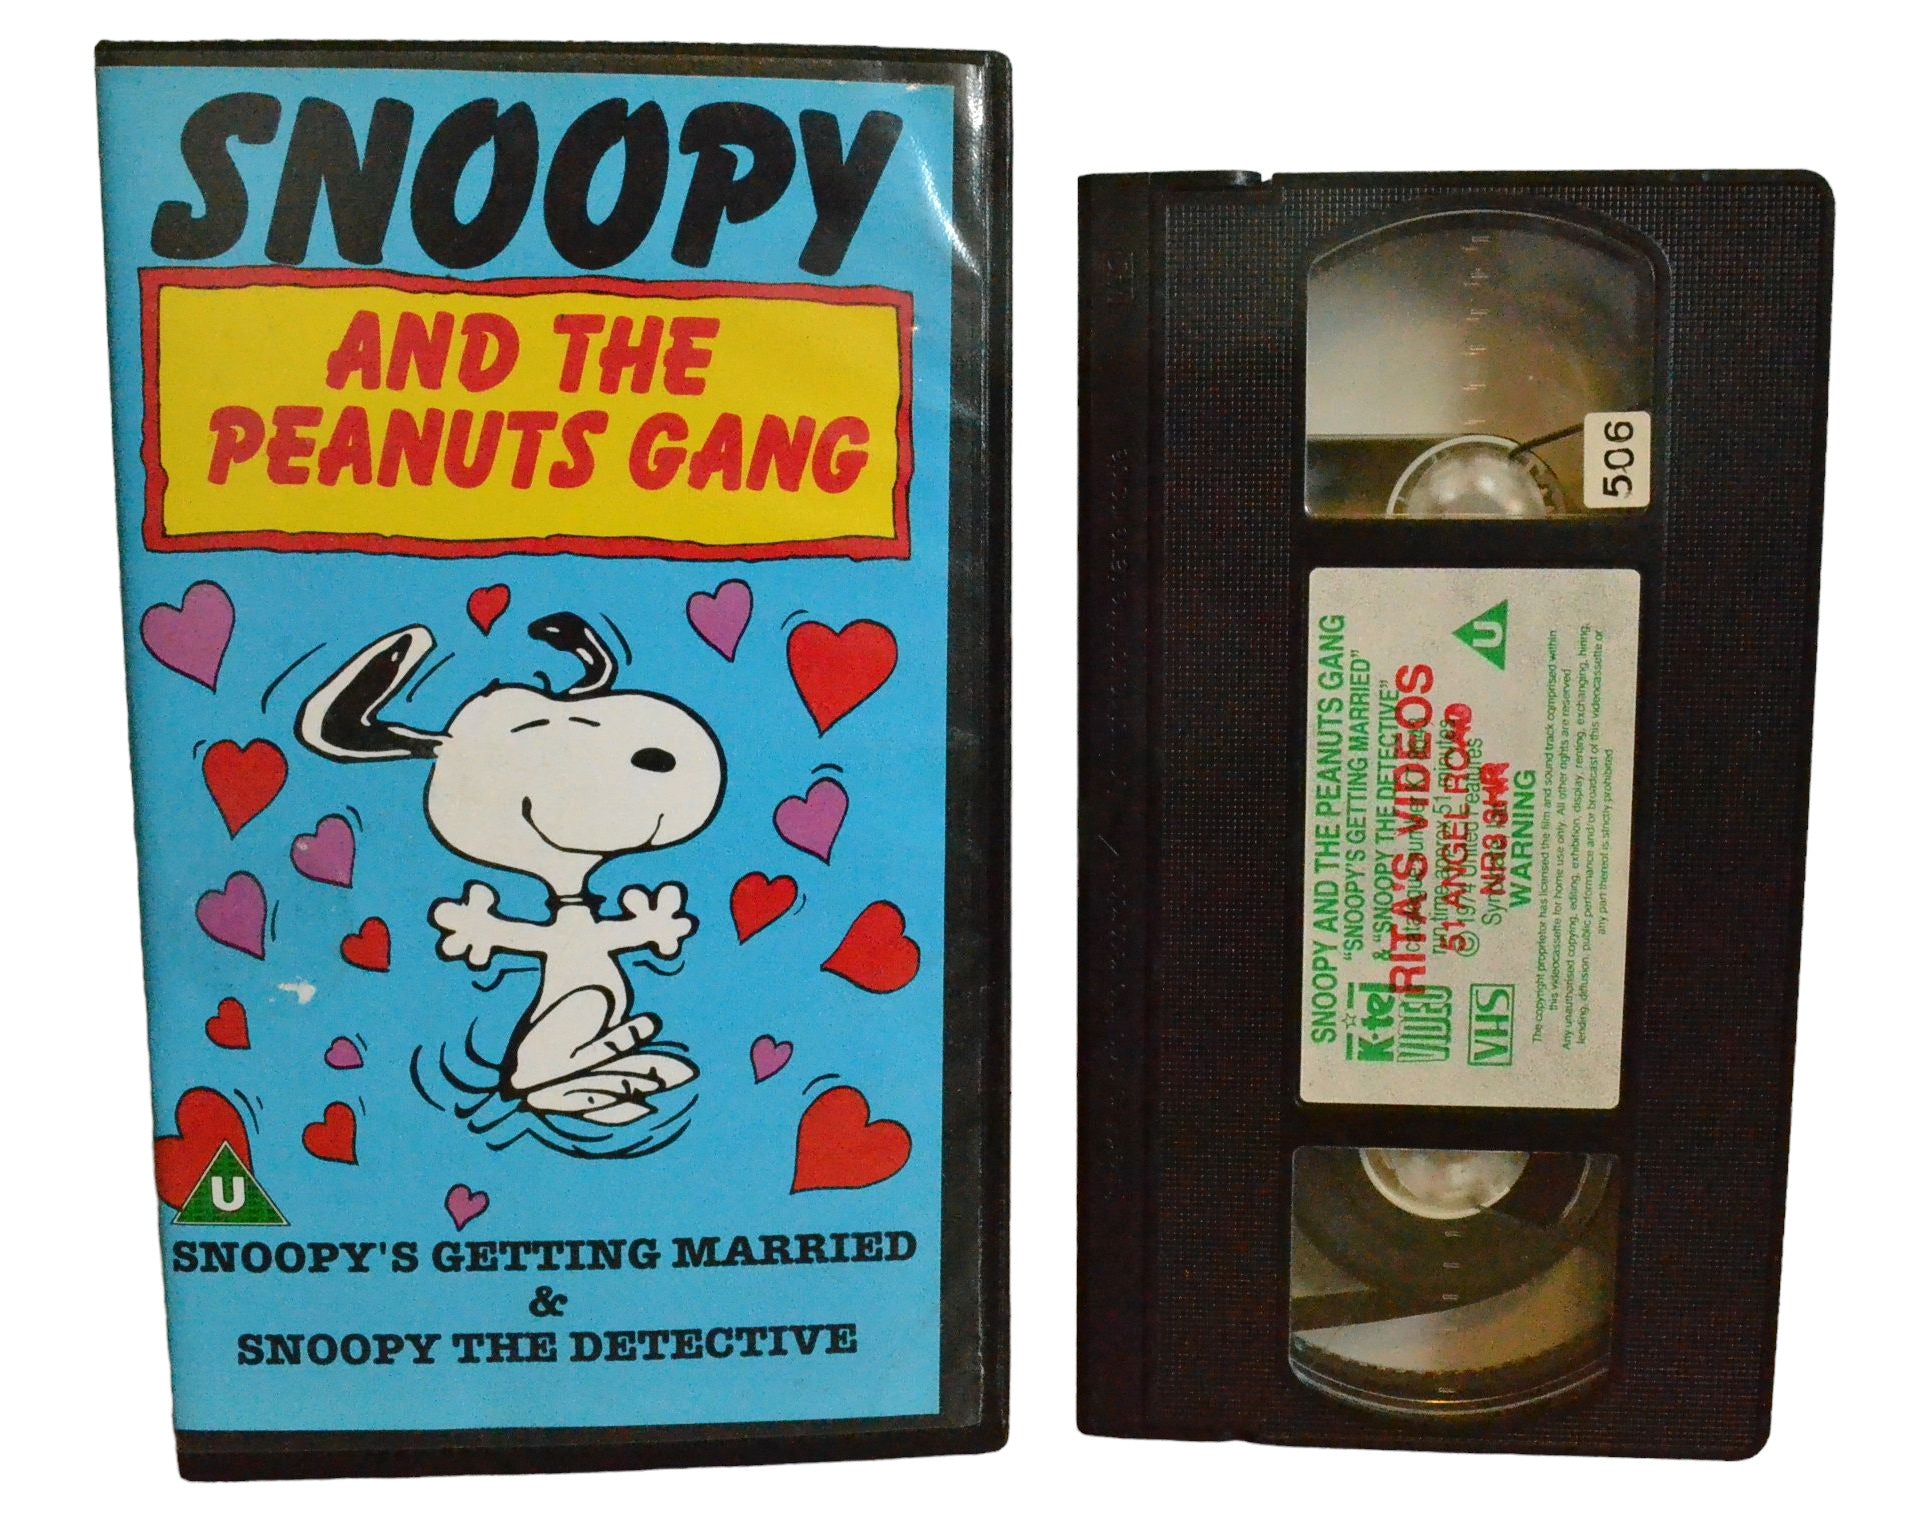 Snoopy And The Peanuts Gang (Snoopy's Getting Married) - Noah Schnapp - K-tel Video - 506 - Children - Pal - VHS-